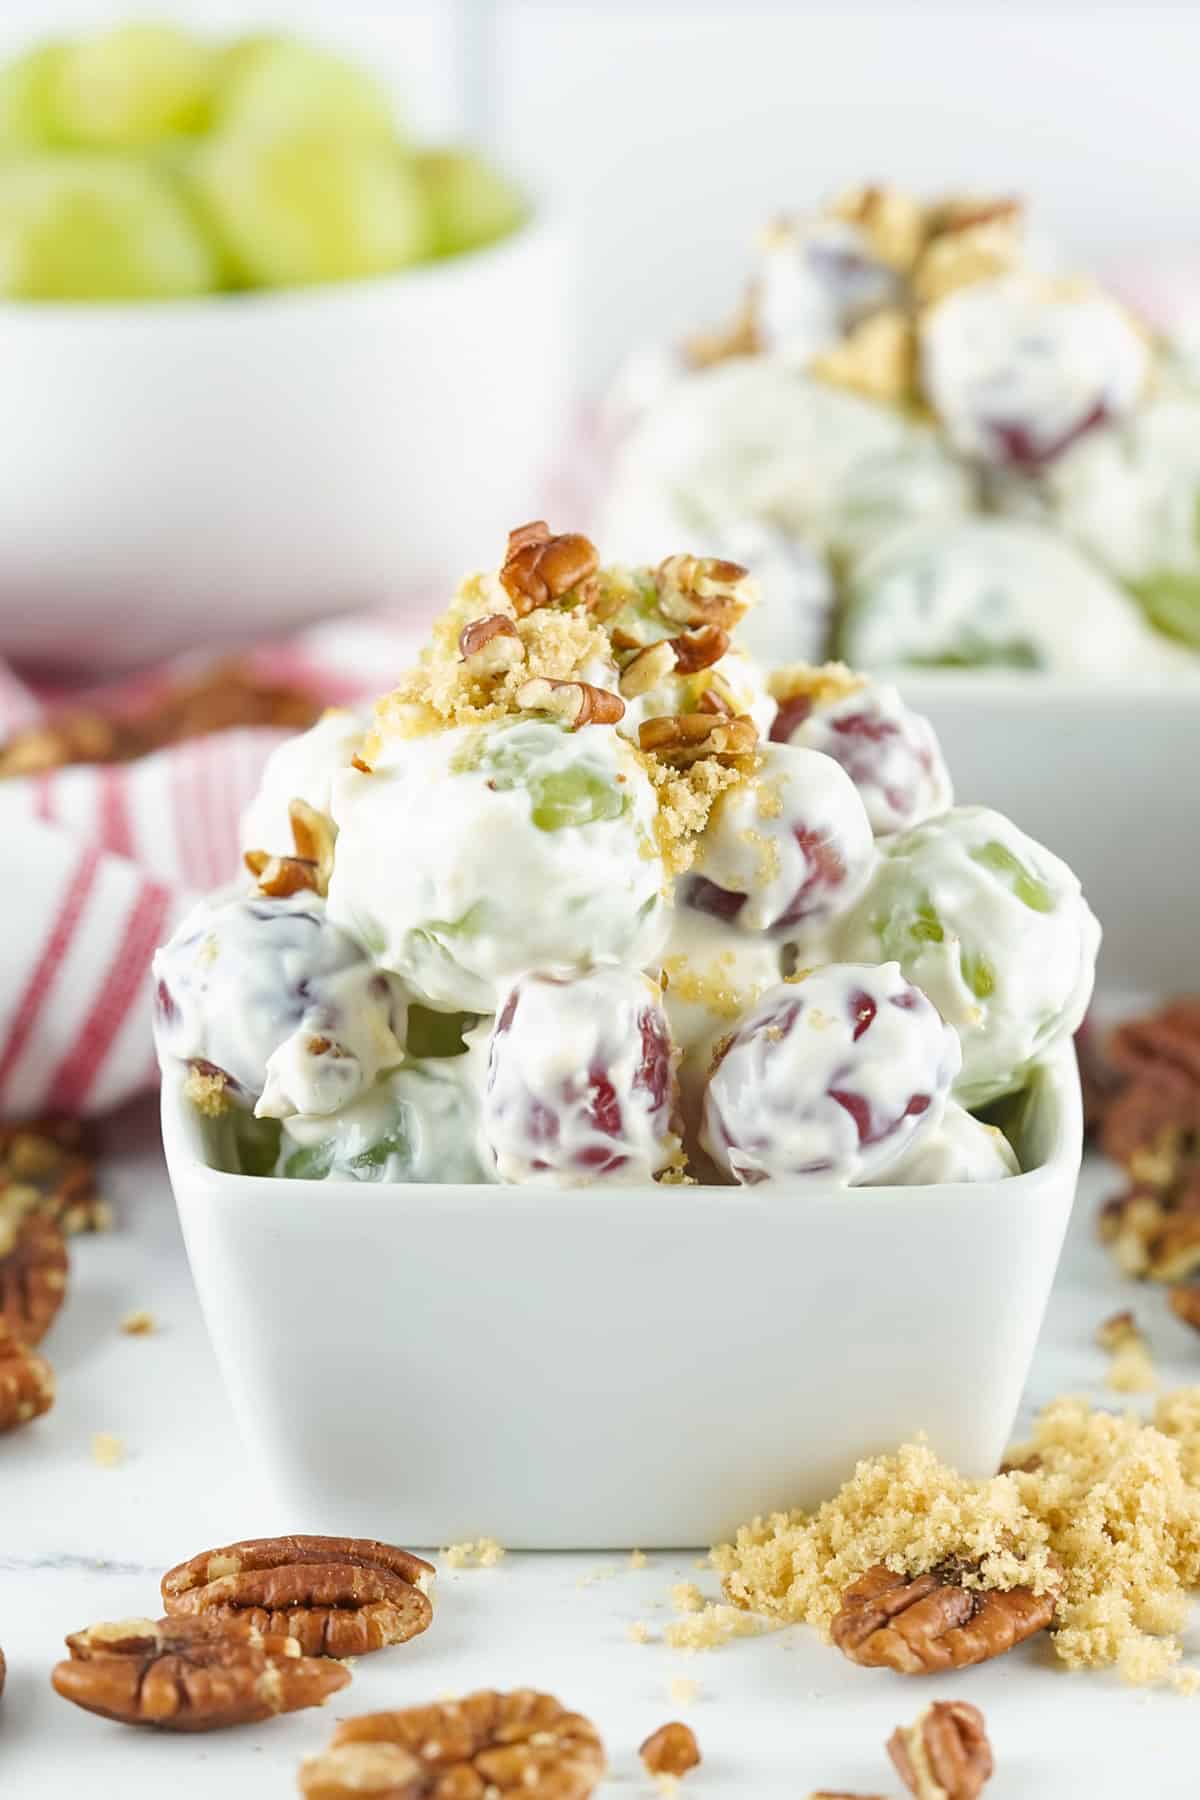 A serving of grape salad in a white bowl.